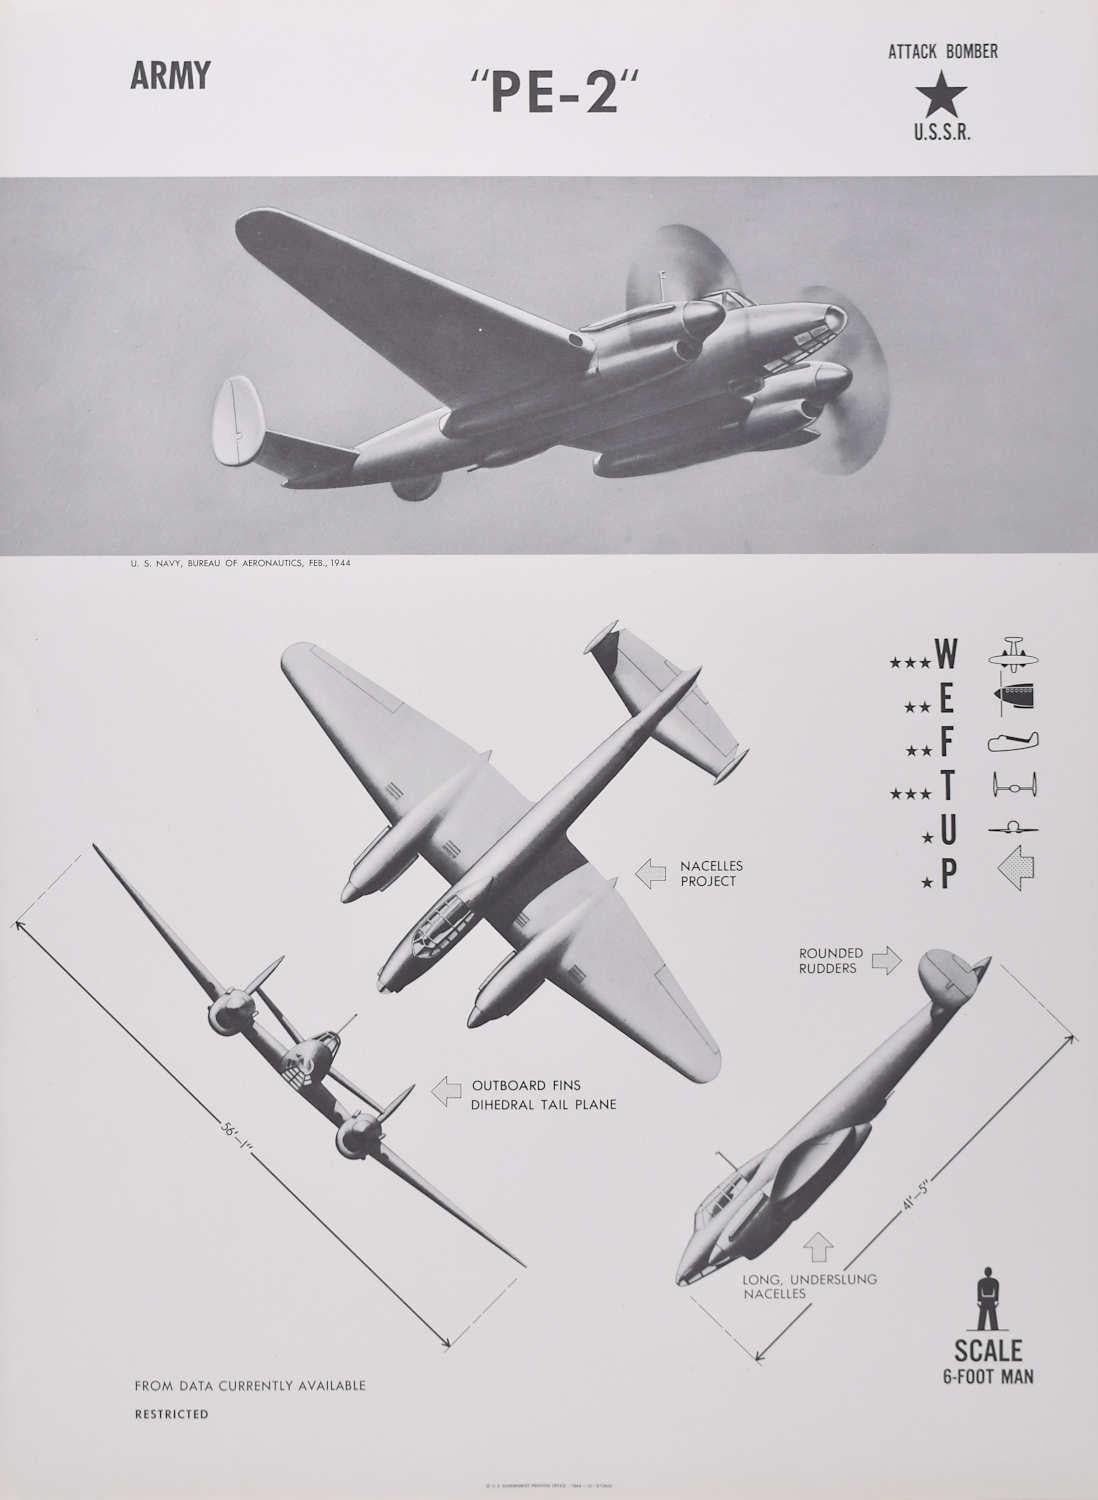 1944 "PE-2" Russian USSR attack bomber plane identification poster WW2 - Print by Unknown